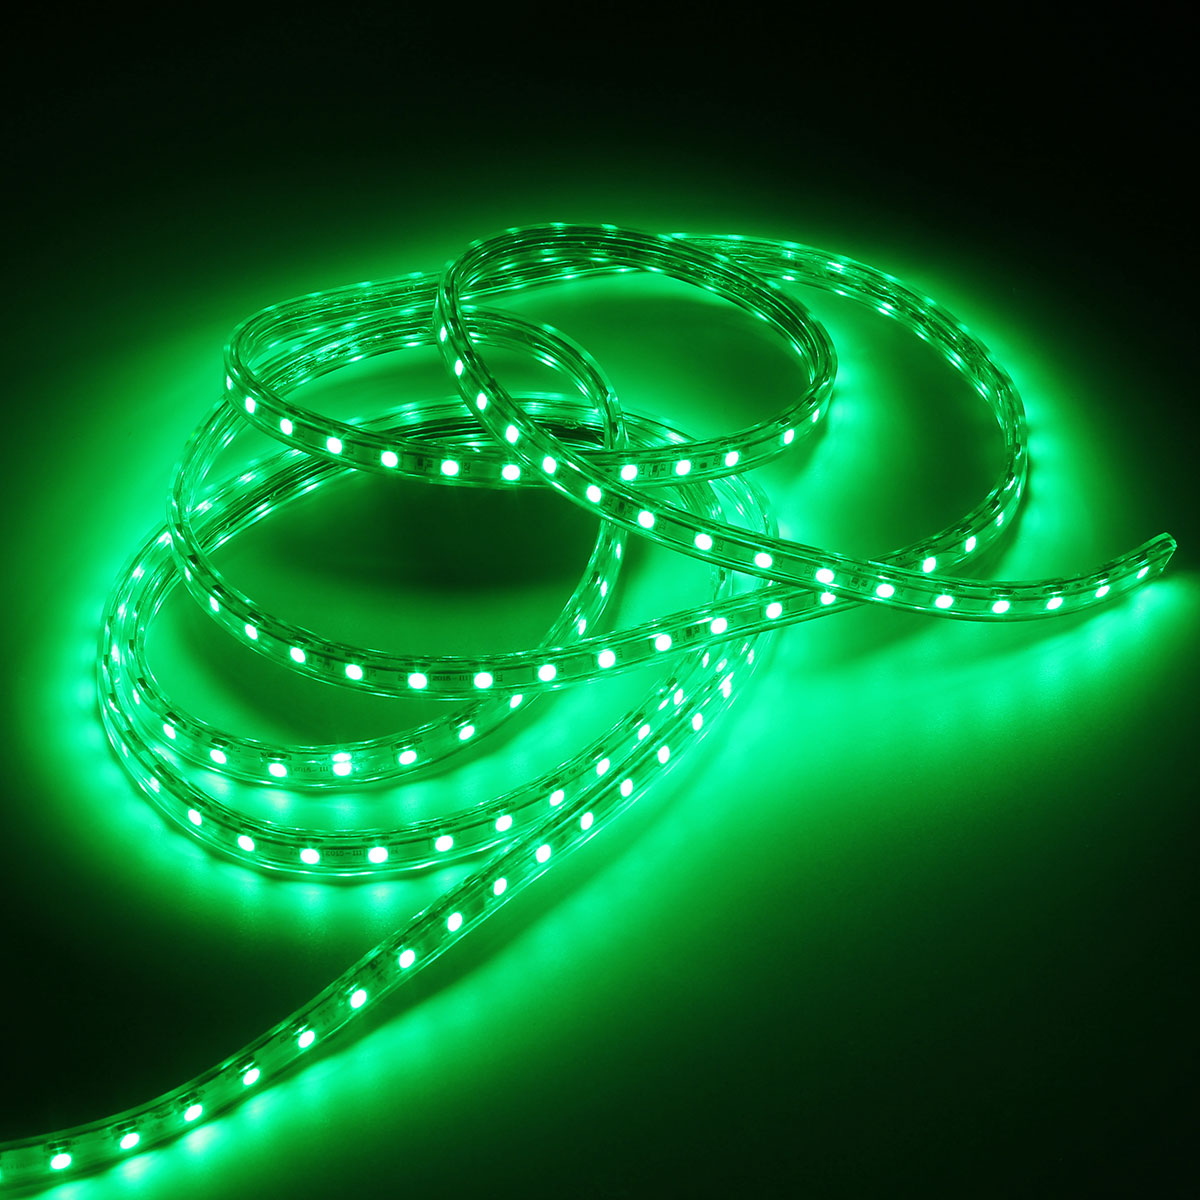 220V-3M-5050-LED-SMD-Outdoor-Waterproof-Flexible-Tape-Rope-Strip-Light-Xmas-1066318-8